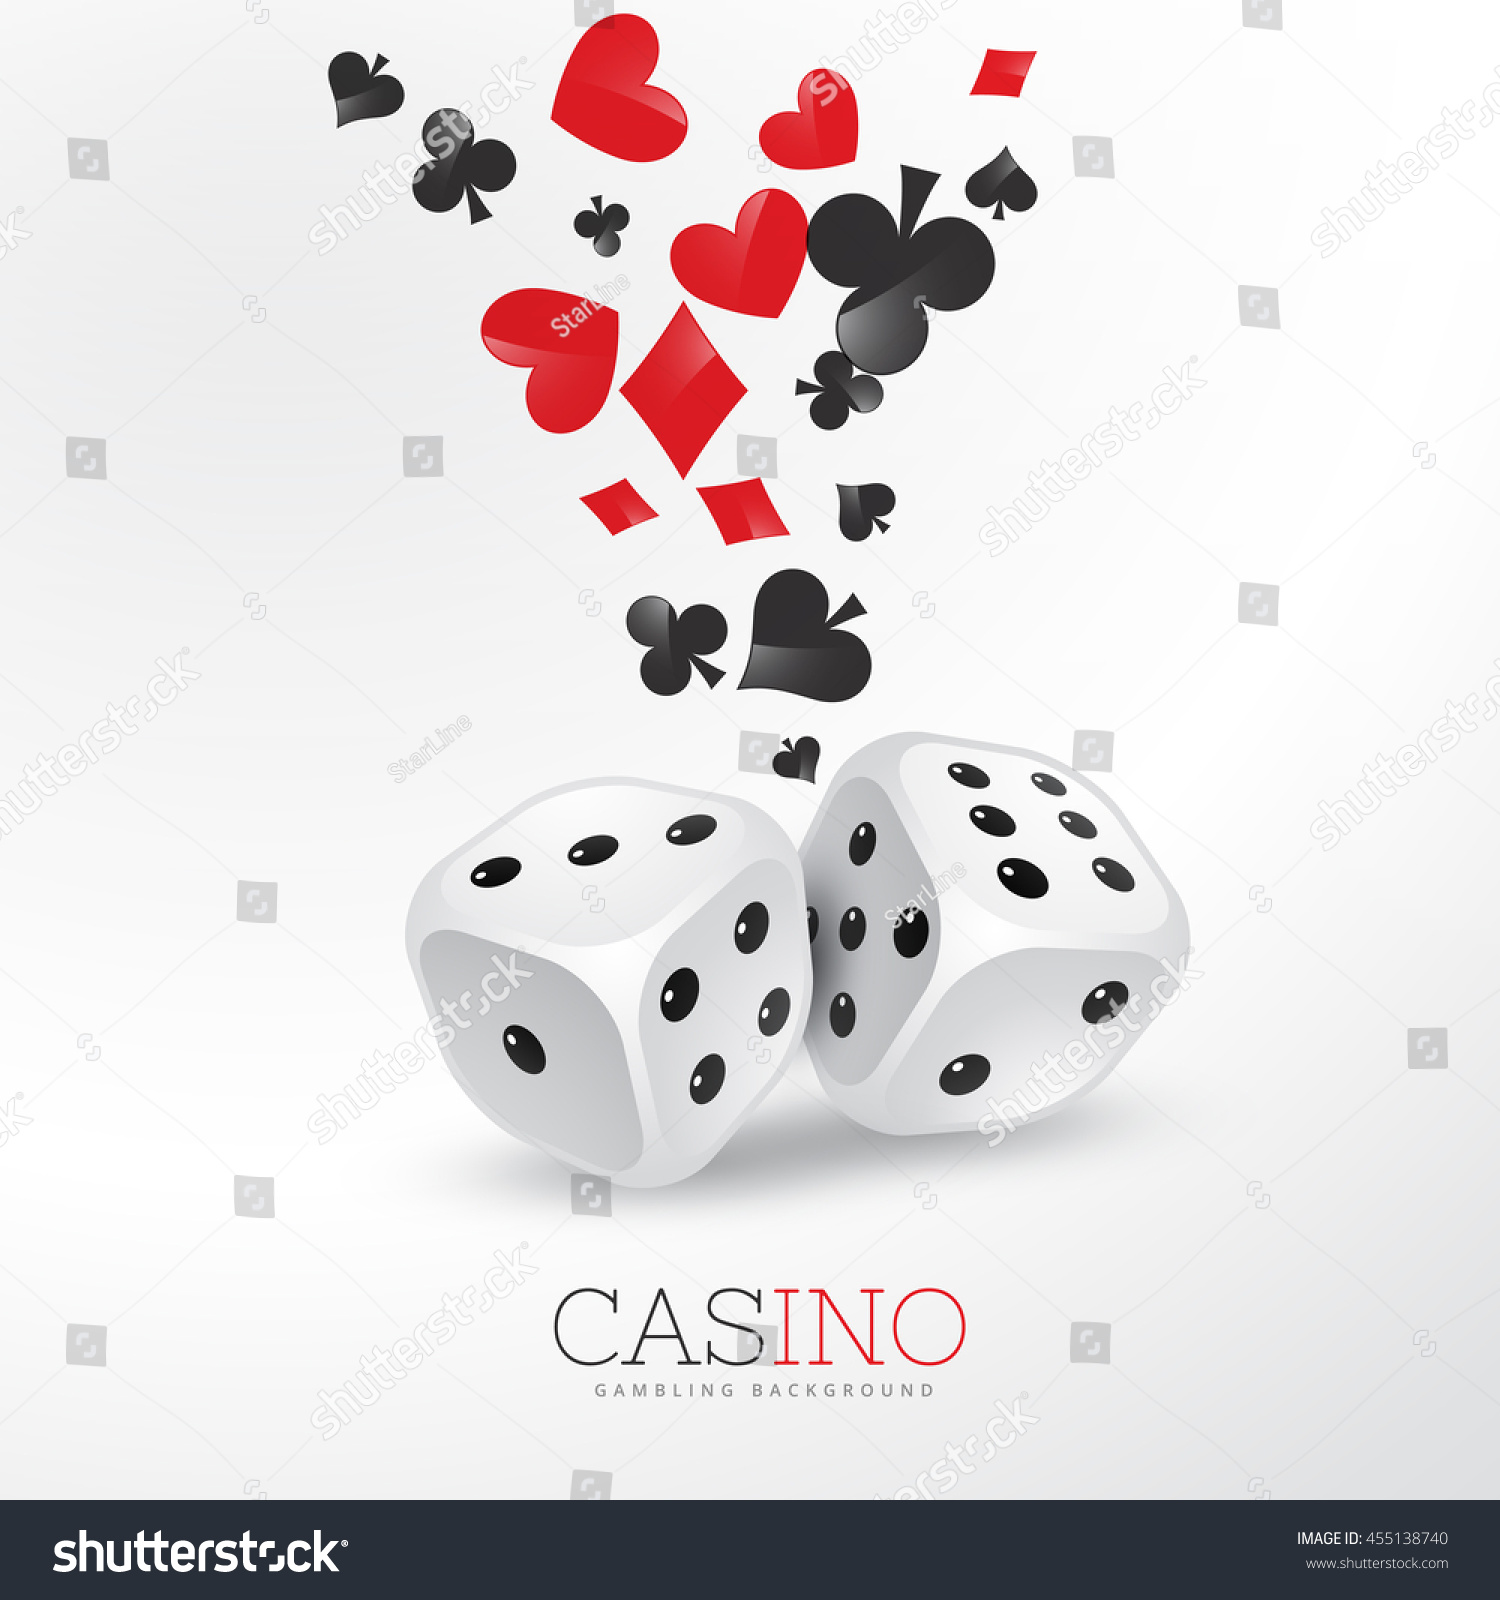 Poker Card Elements Two Dices Stock Photo (Photo, Vector ...